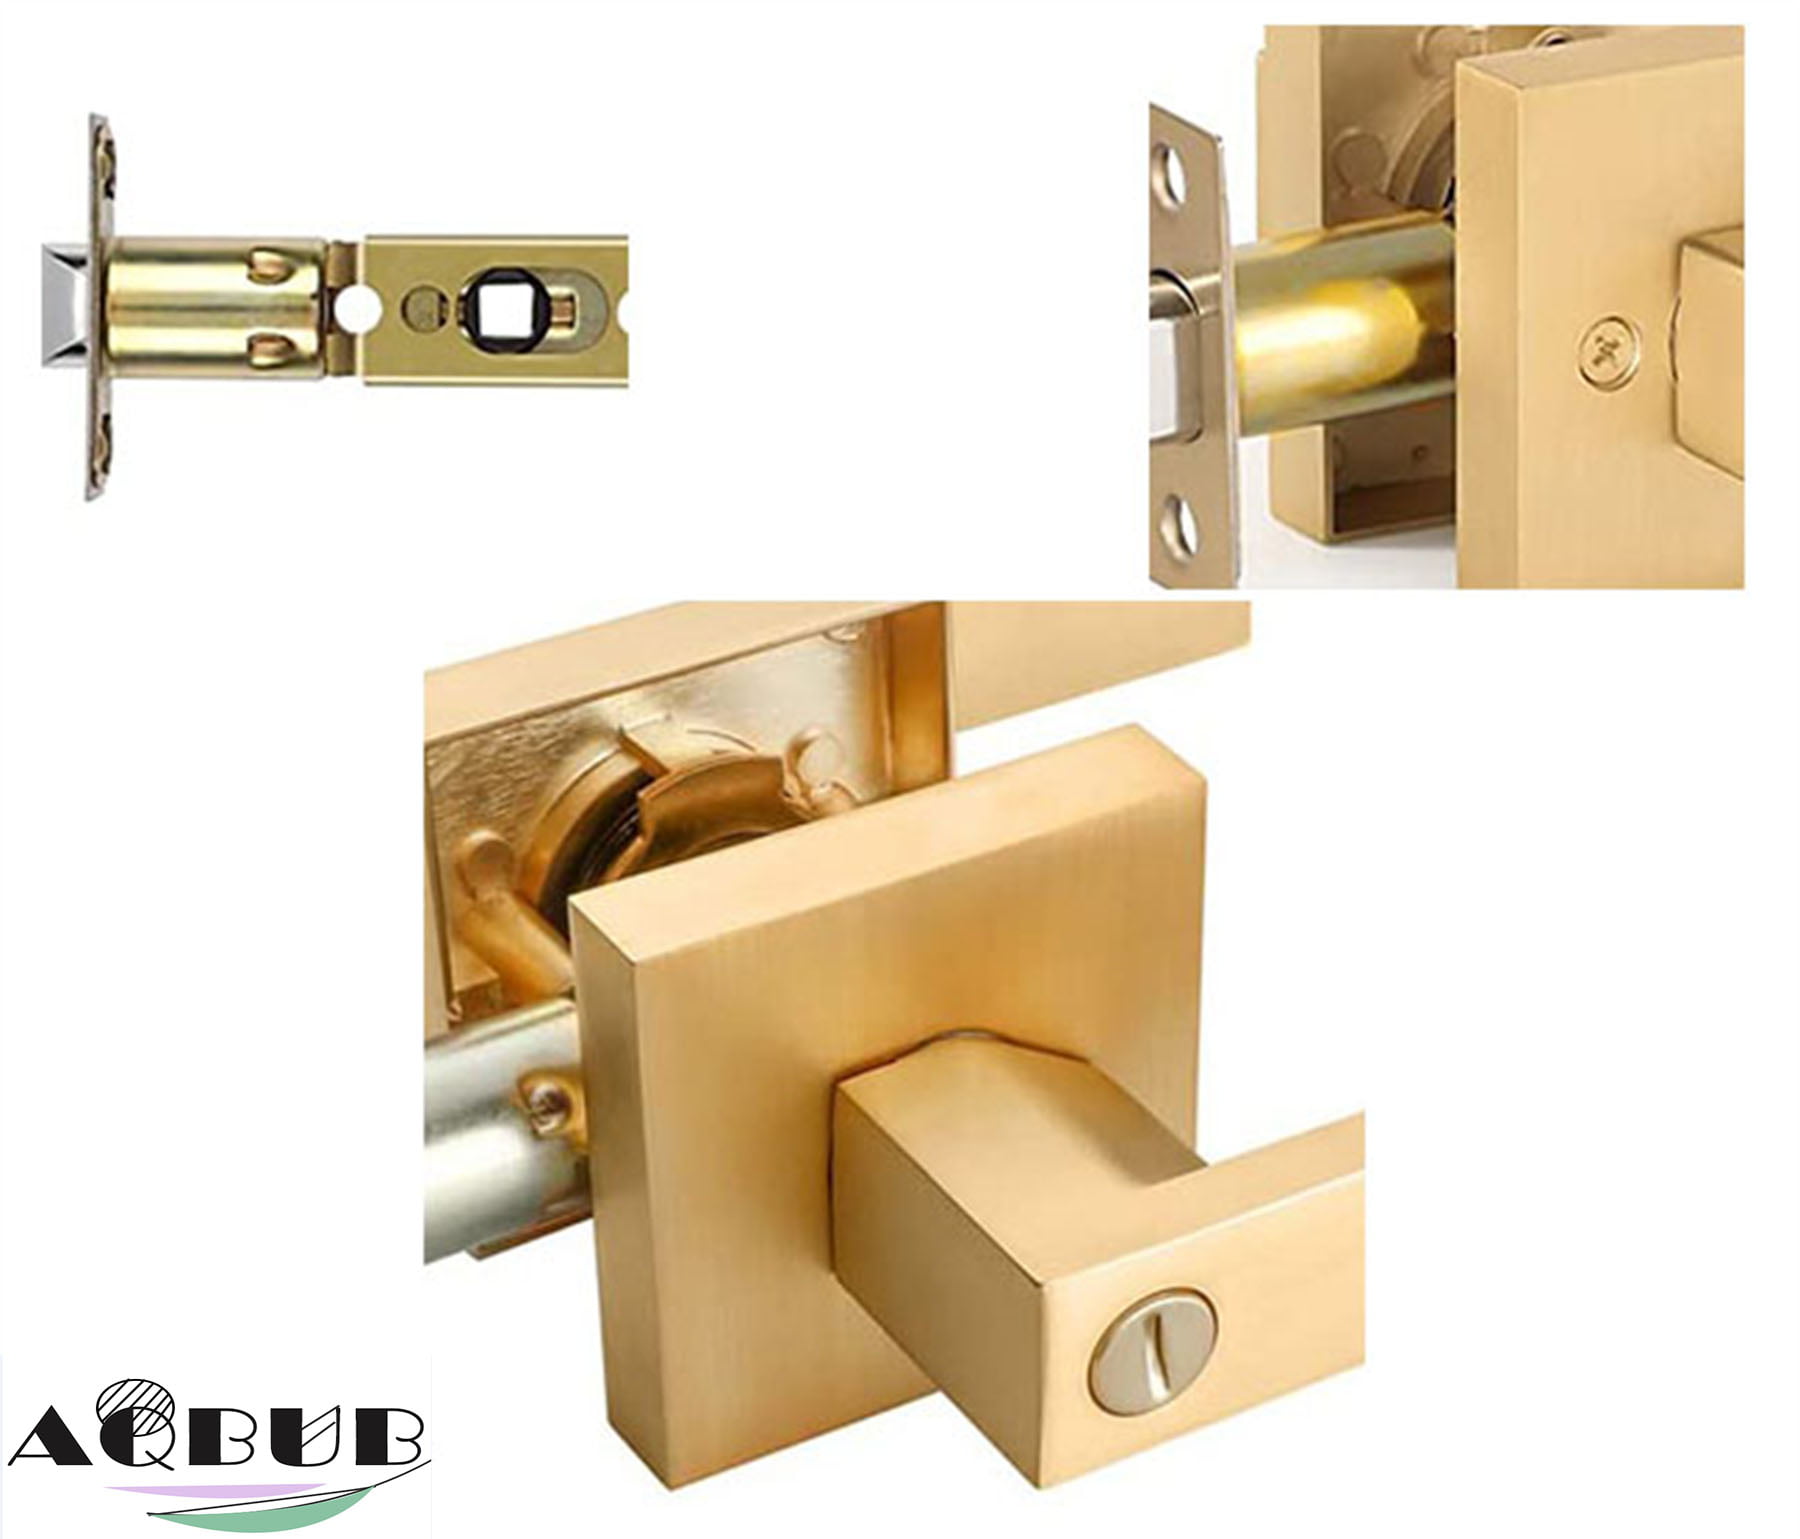 6 sets of interior door handles with satin brass finish, privacy